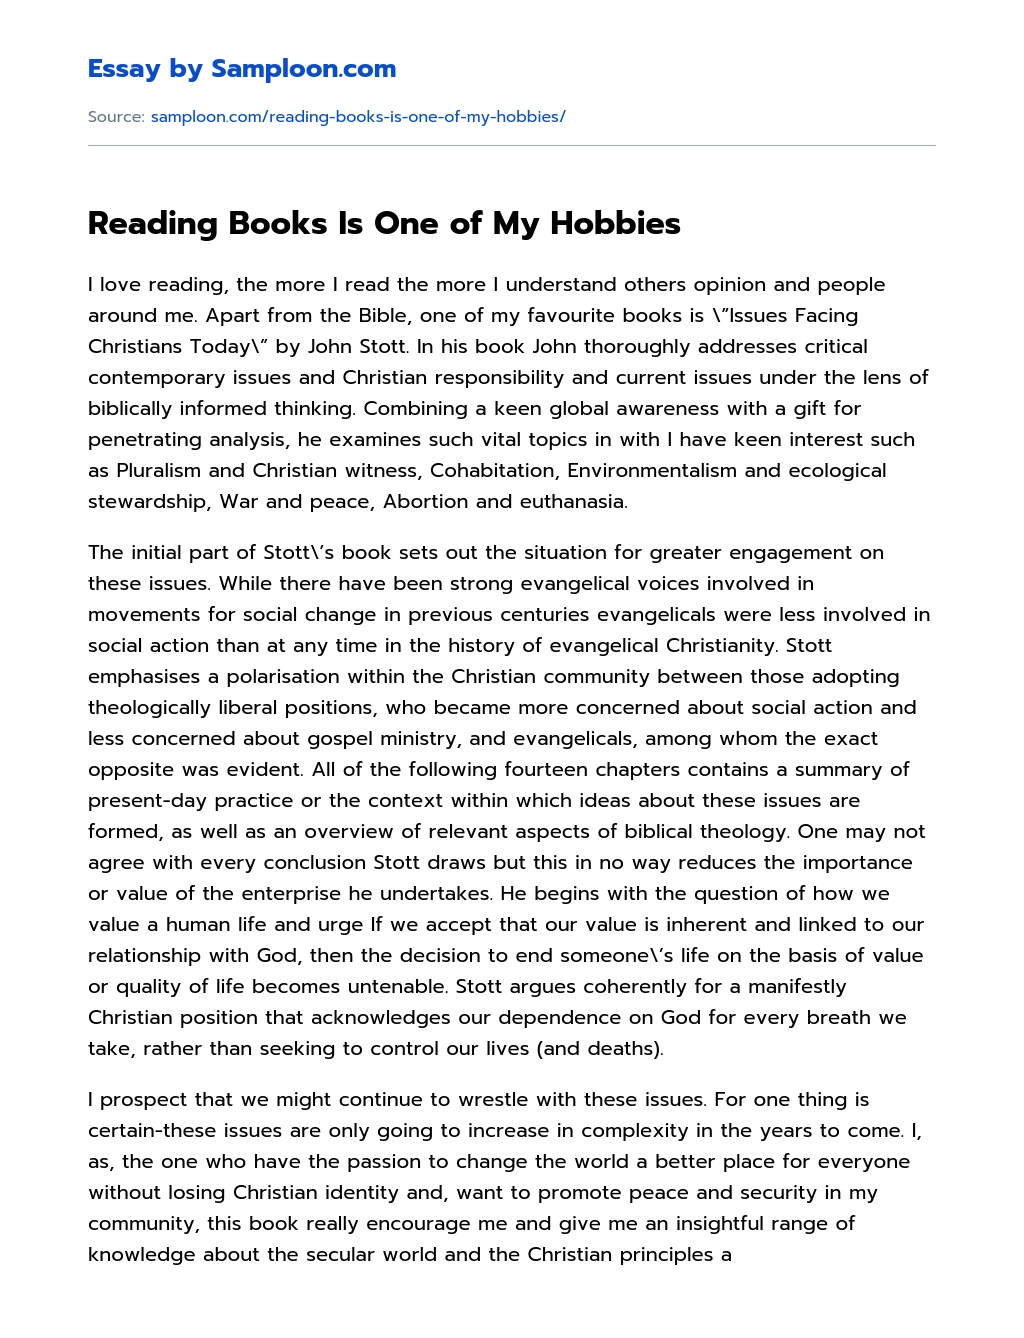 Reading Books Is One of My Hobbies essay